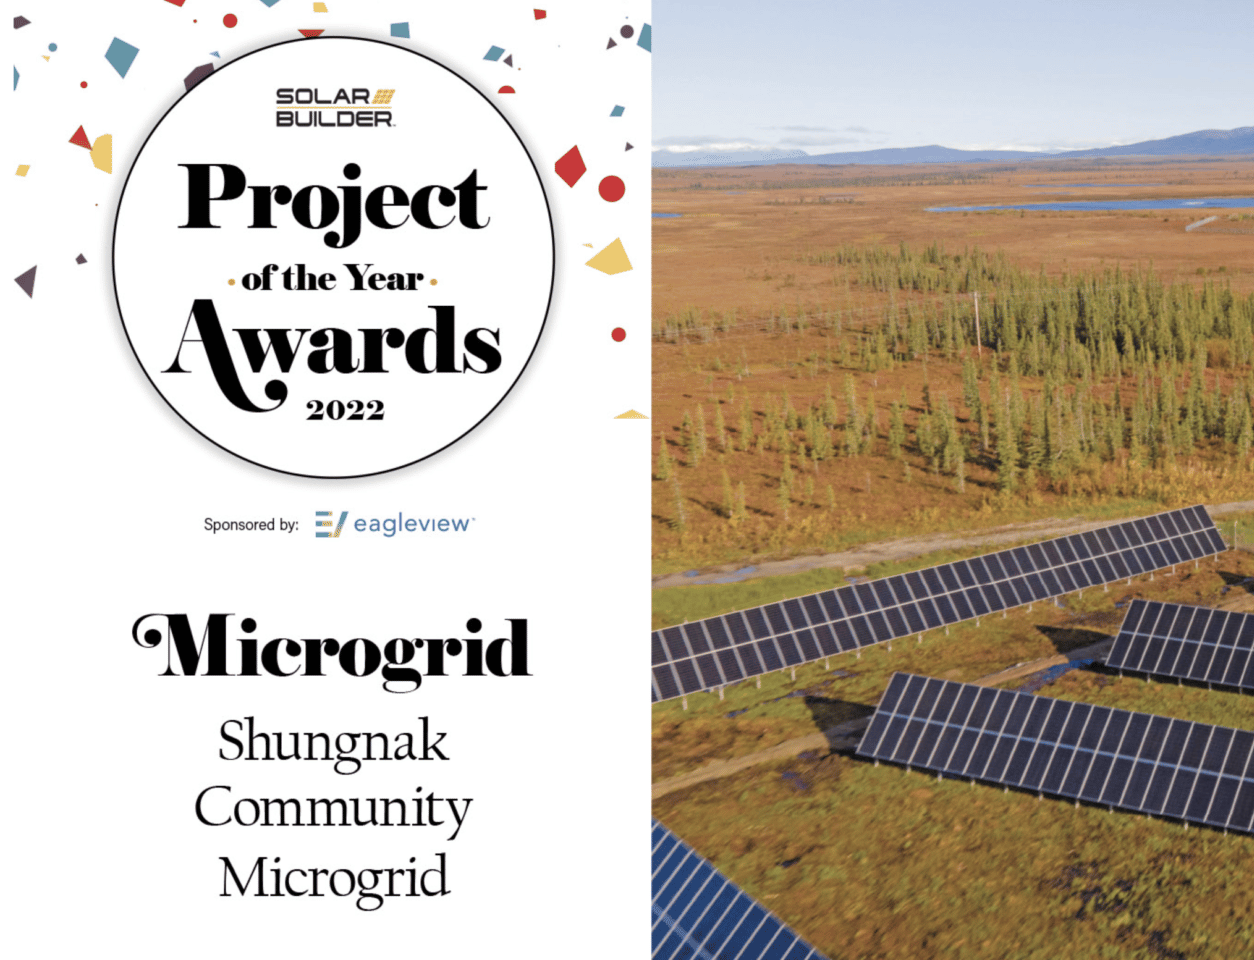 Project of the Year Awards